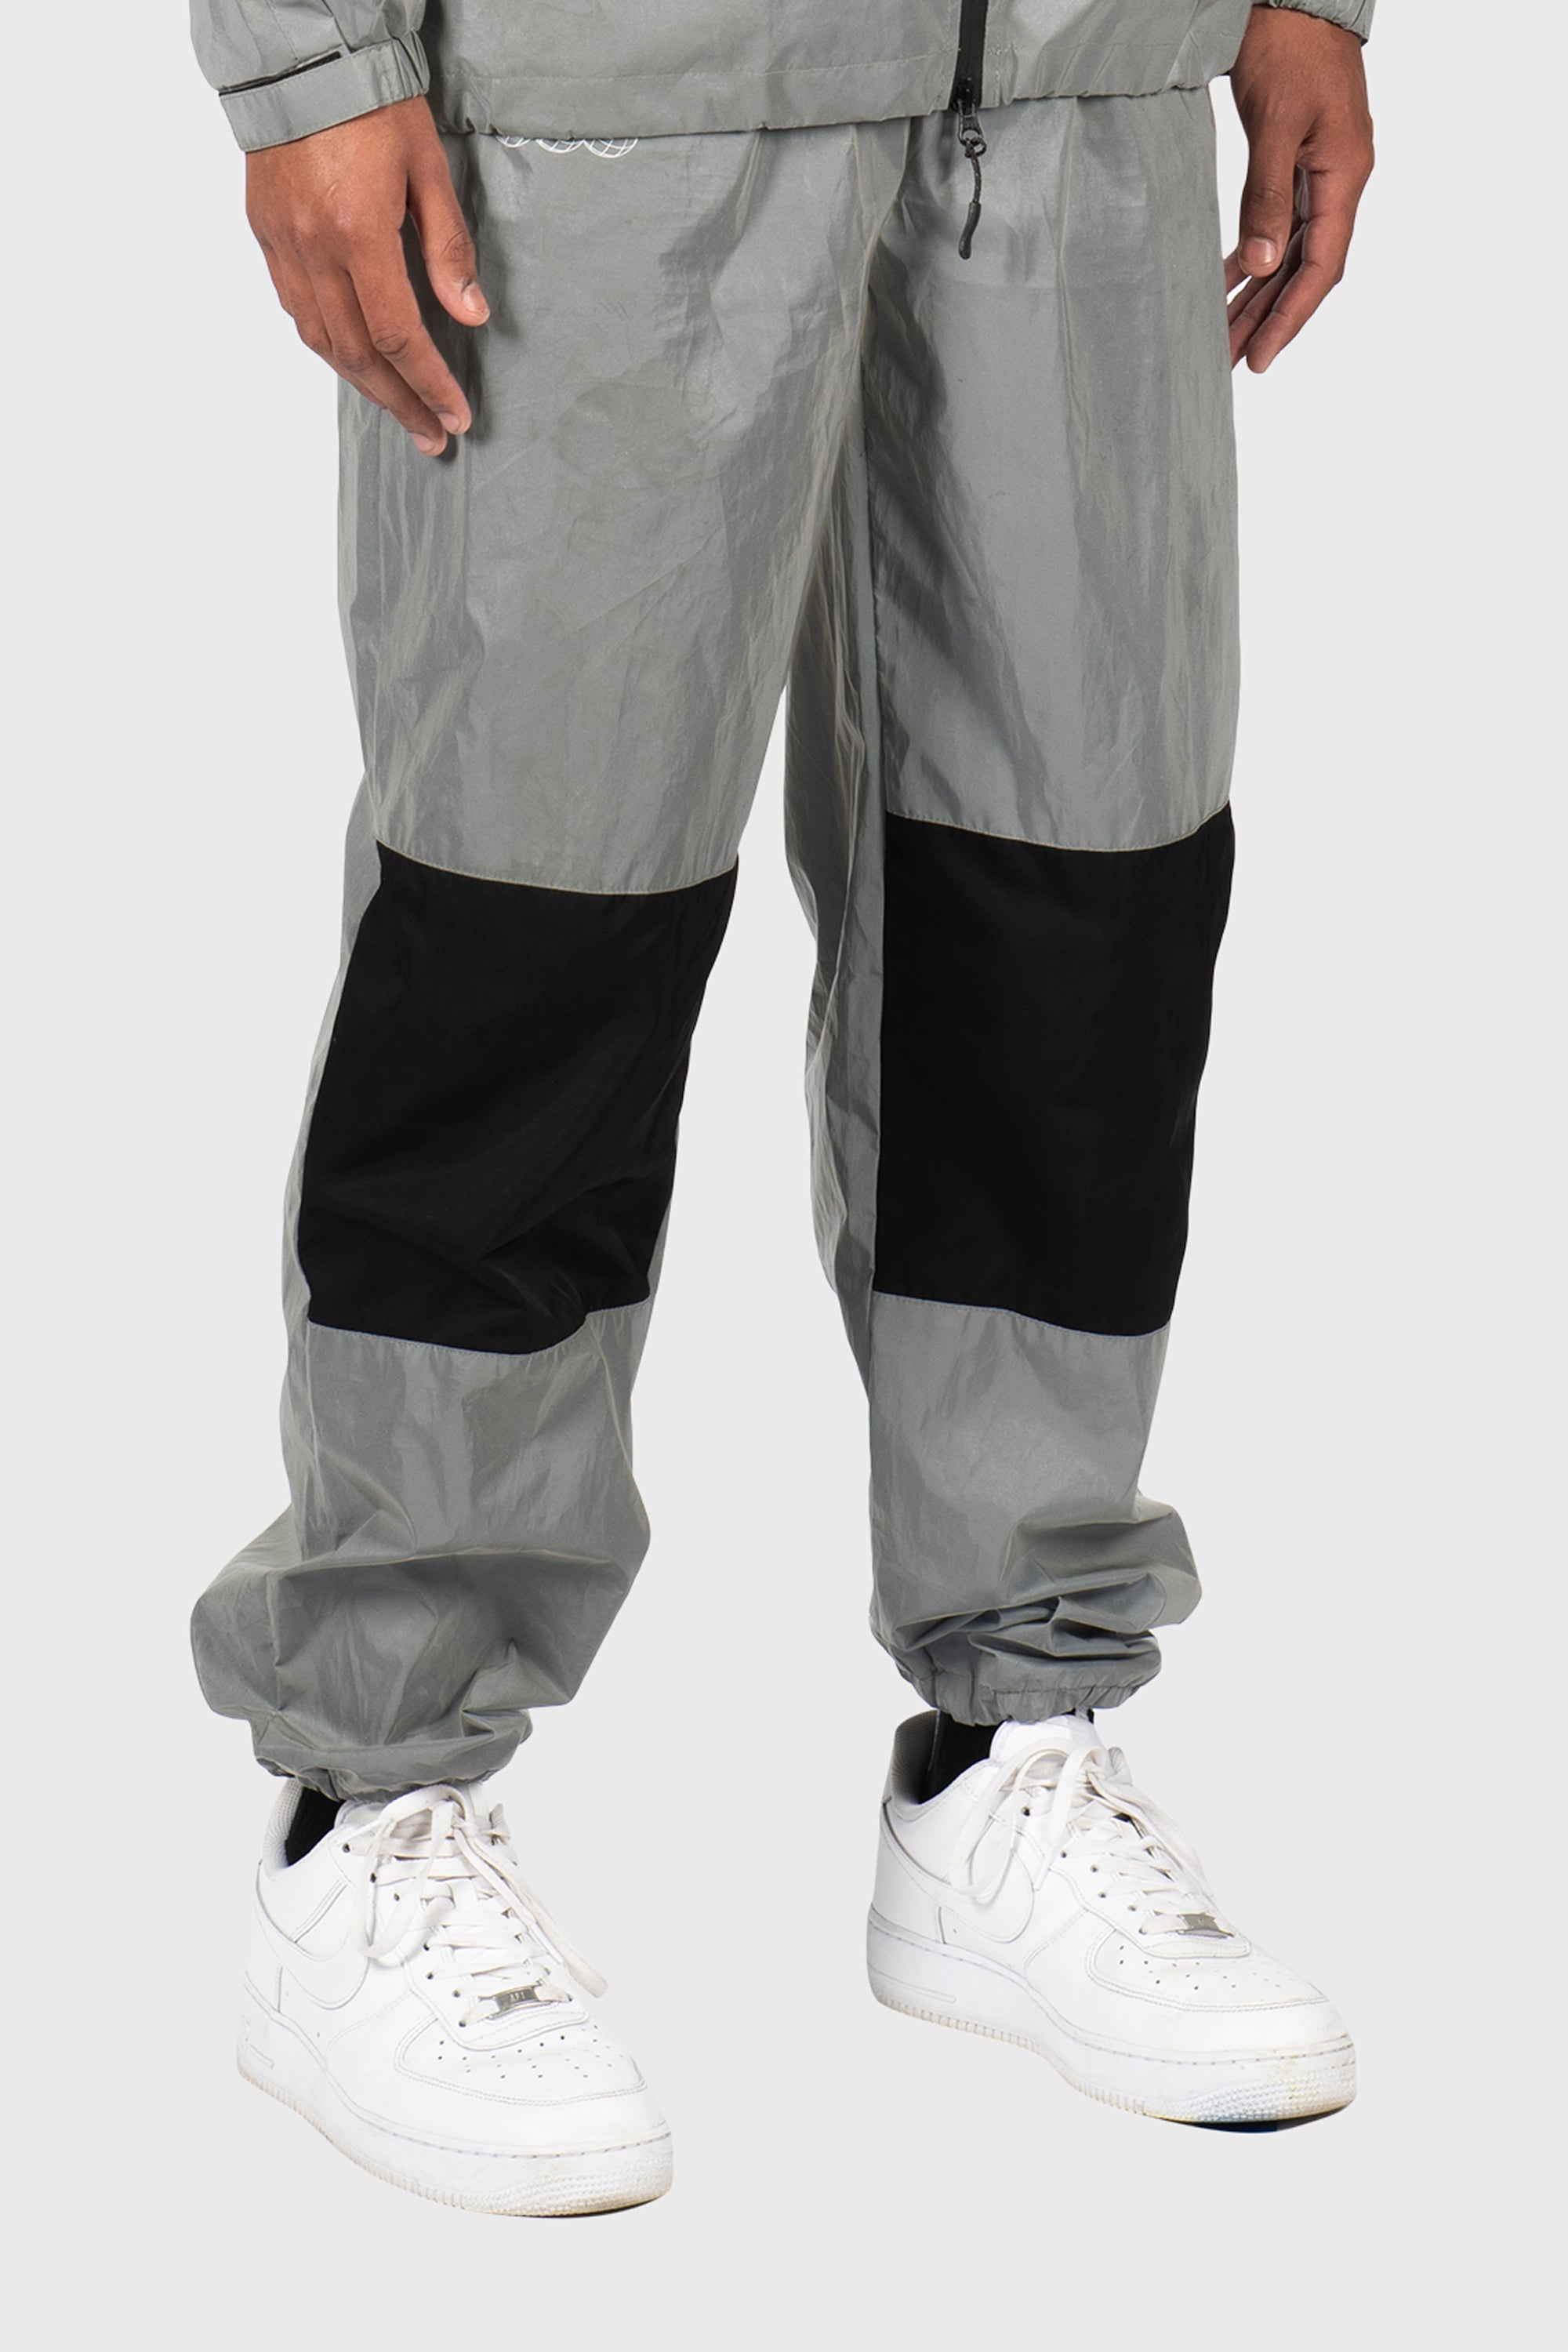 3M Silver Reflective Track Pants - The Official Brand